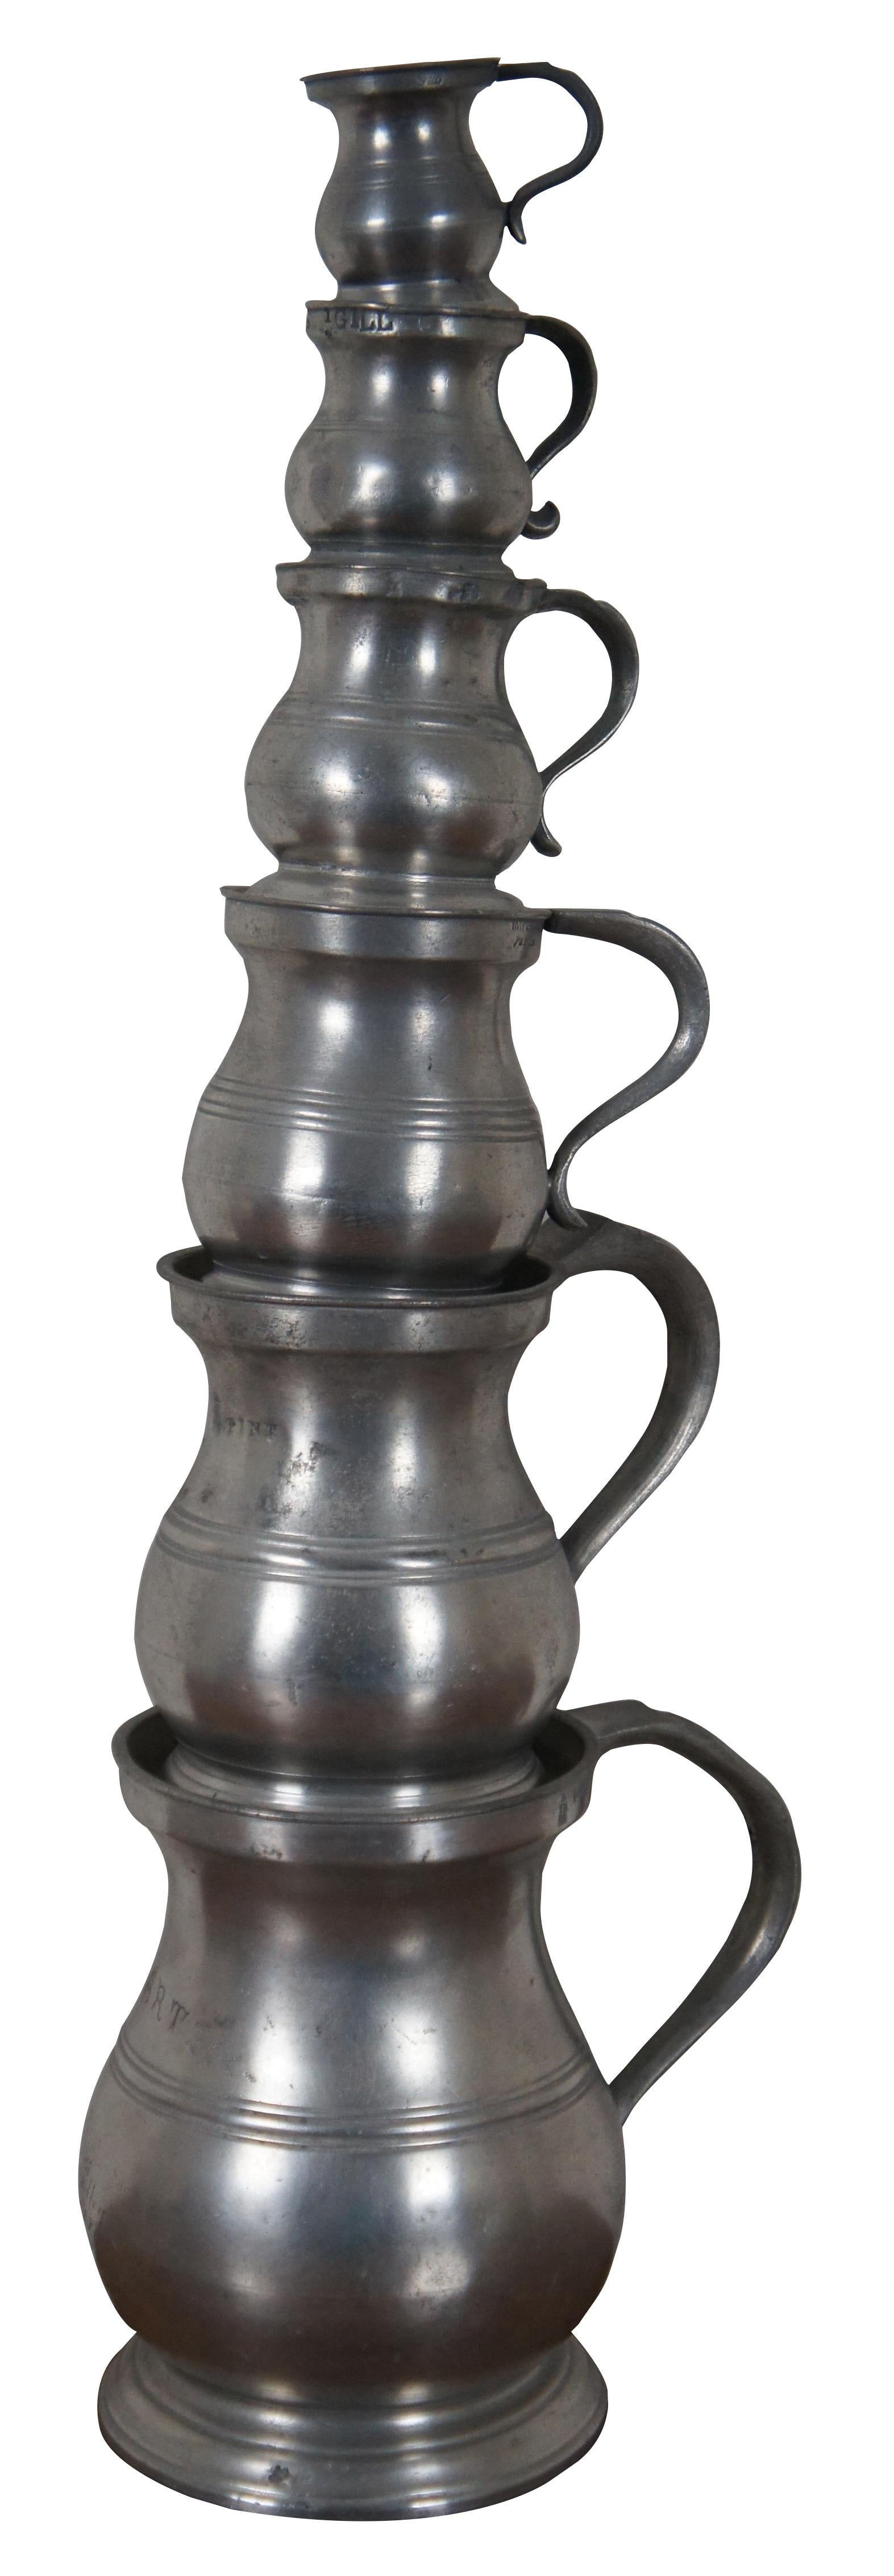 Set of six Victorian / Edwardian English pewter measuring cups, tankards, or mugs featuring a baluster or bellied form with handles and ribbing. The marks found on each mug are described below, numbered from largest to smallest.

#1: Quart –